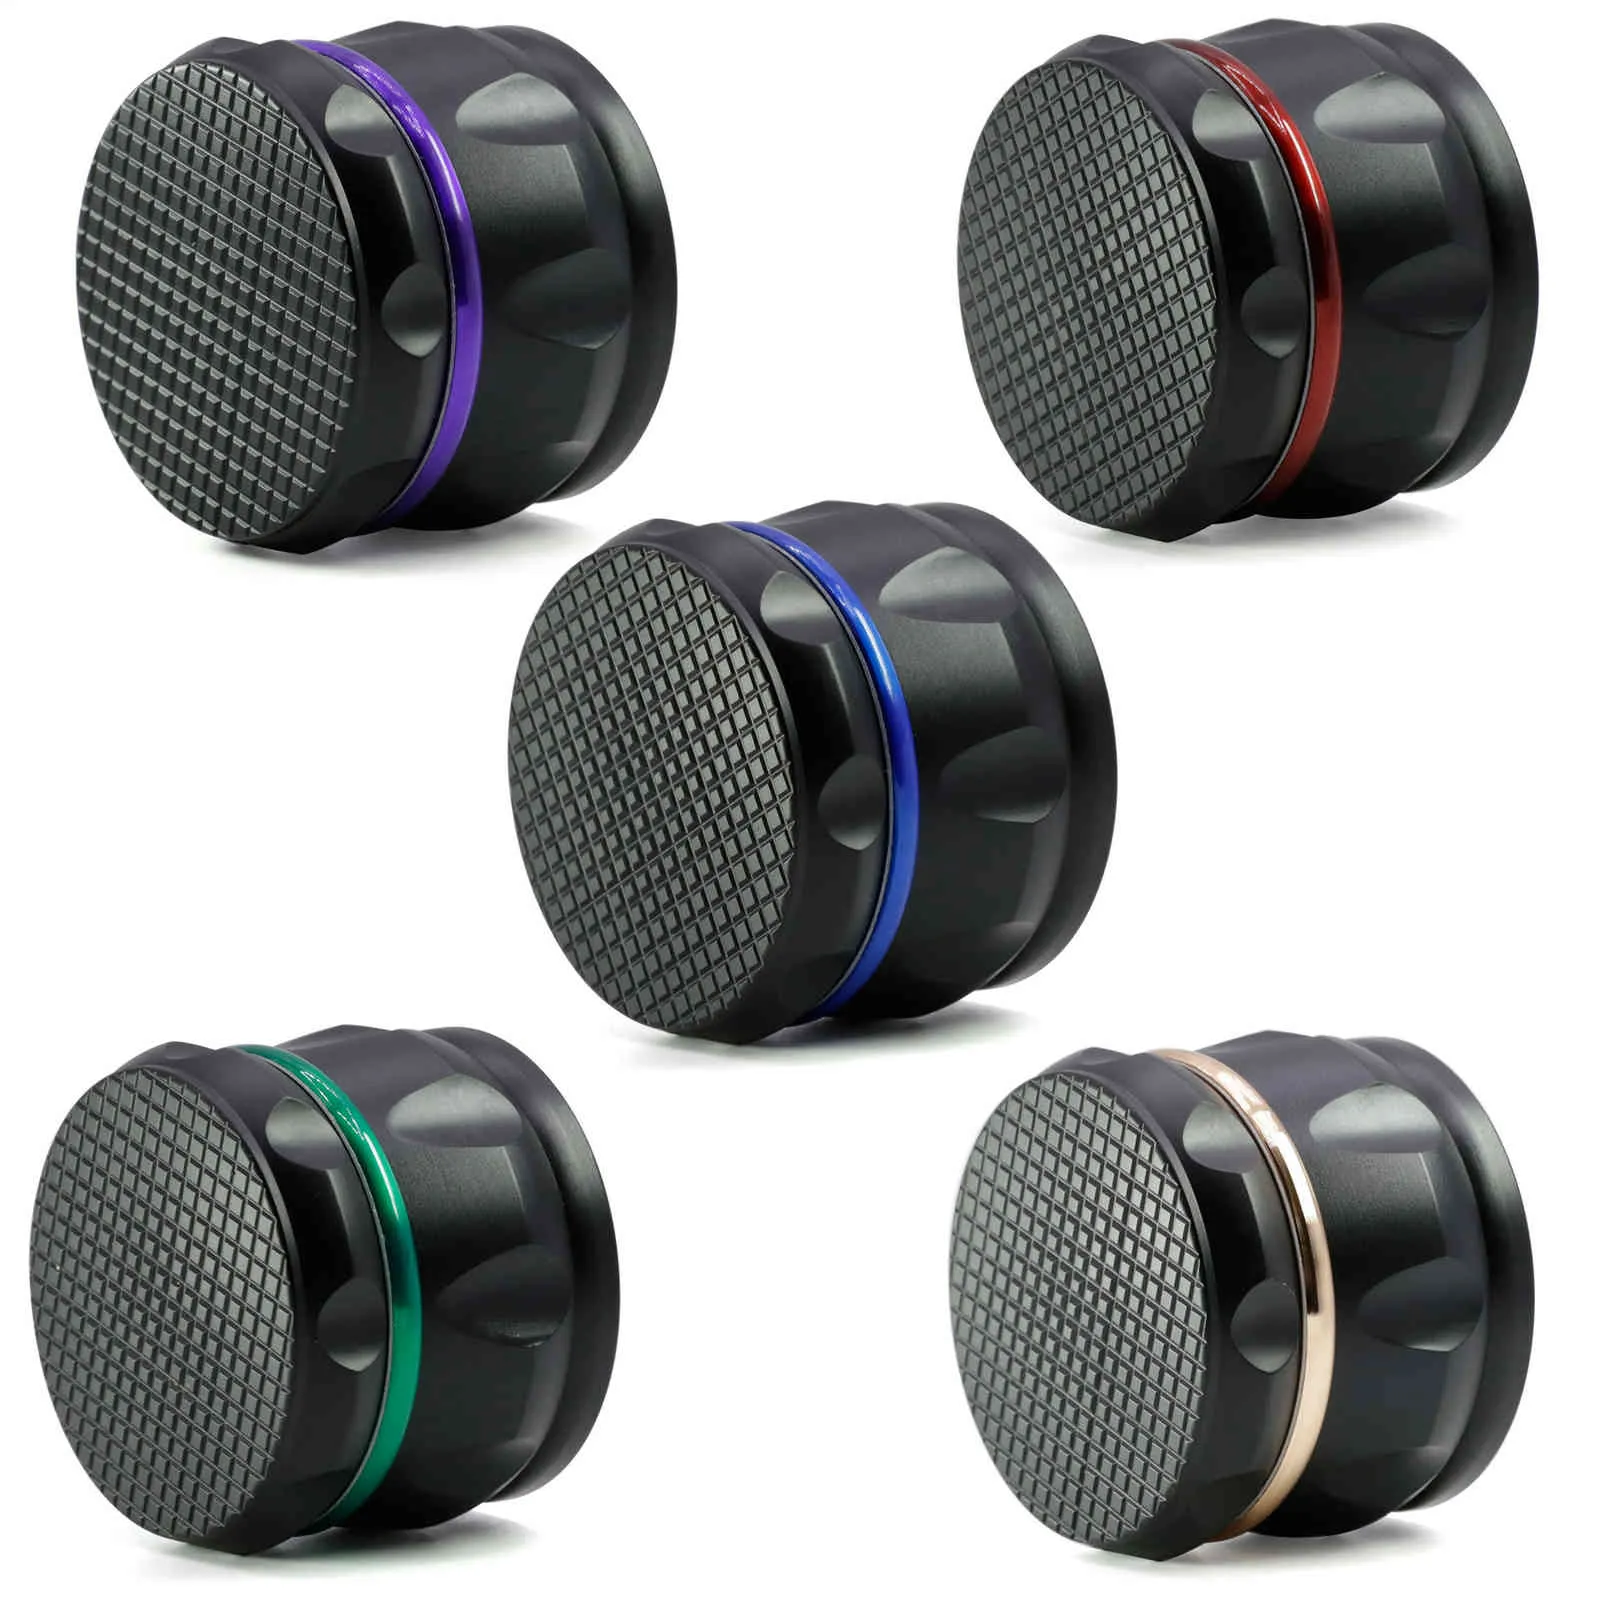 63mm diameter zinc alloy four layer latest diamond chamfered drum grinders cover color matching smoke grinder